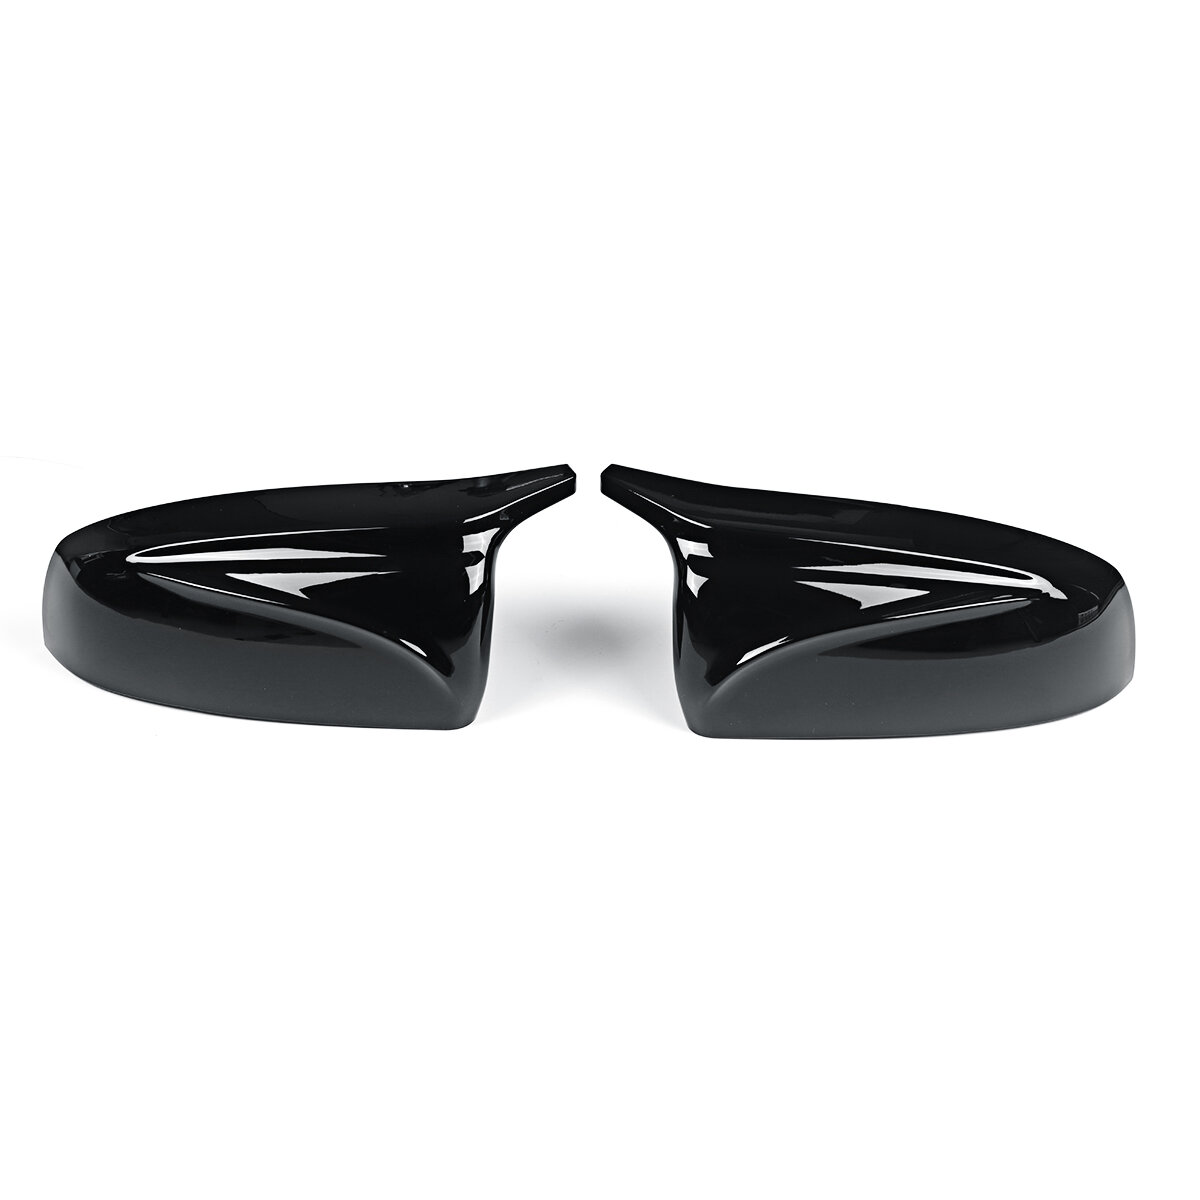 Glossy Black M Style Rear View Mirror Cap Cover Replacement Pair For BMW X5 X6 E70 E71 2007-2013